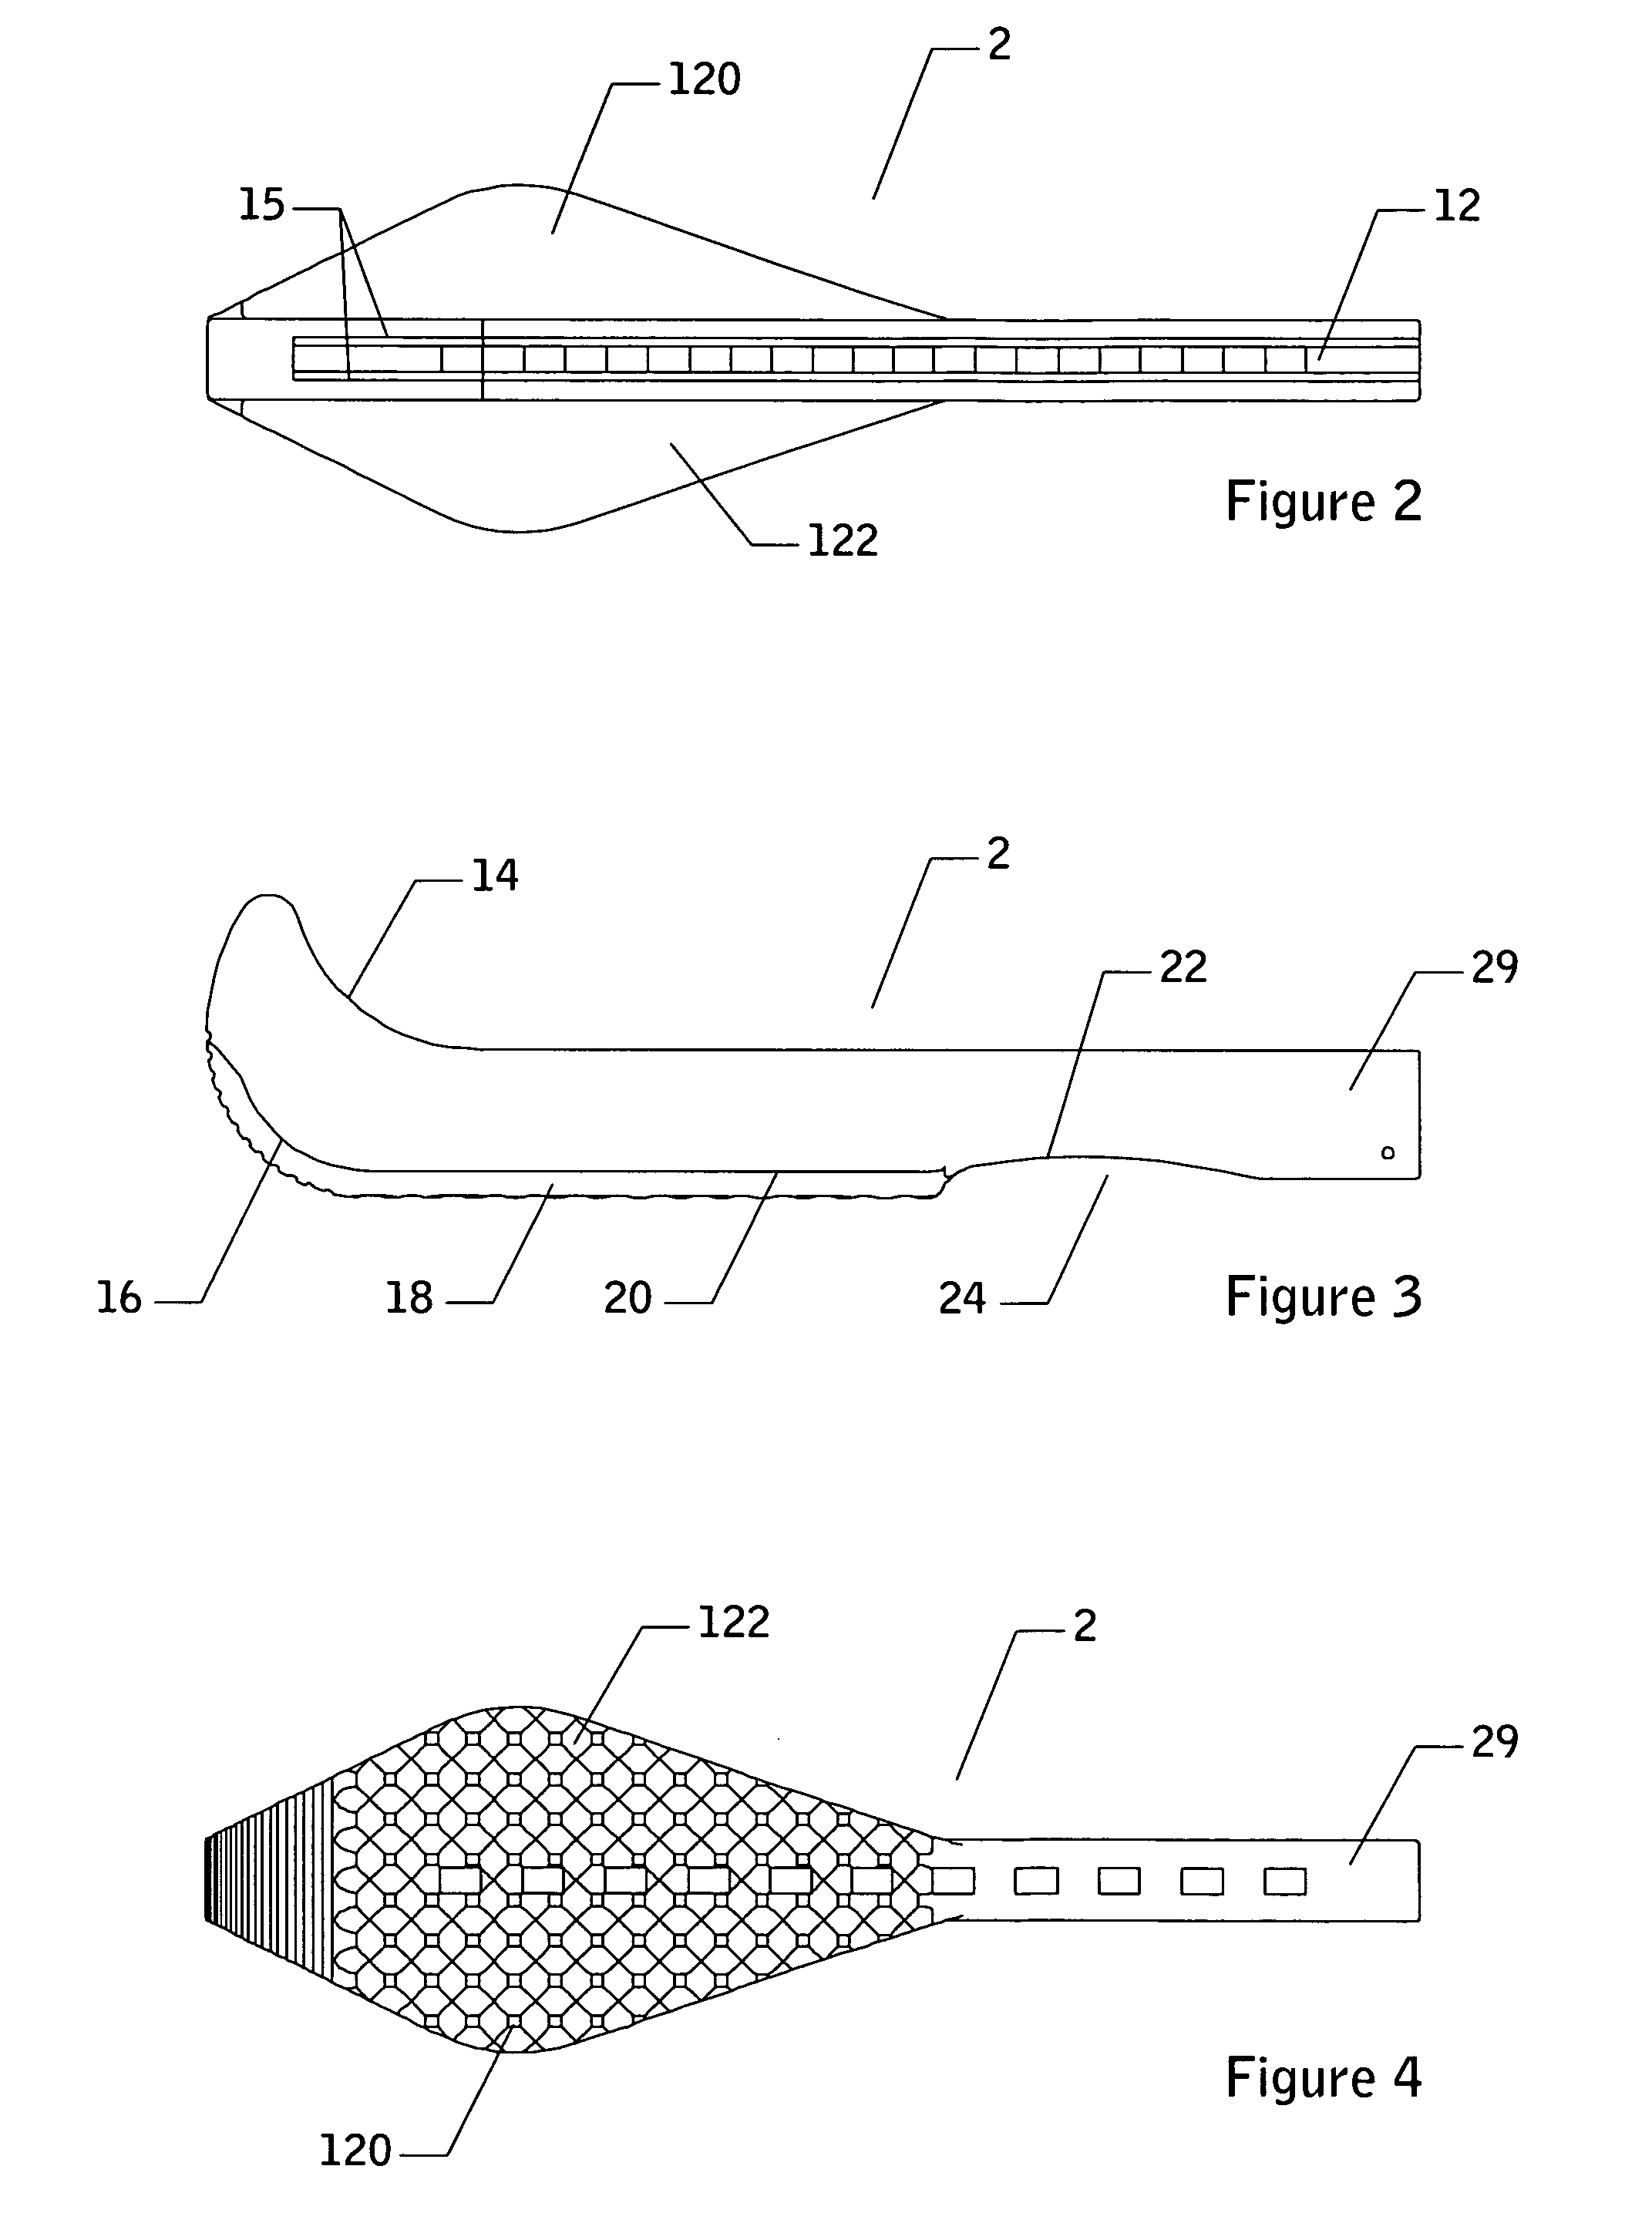 Skate guard and walking device